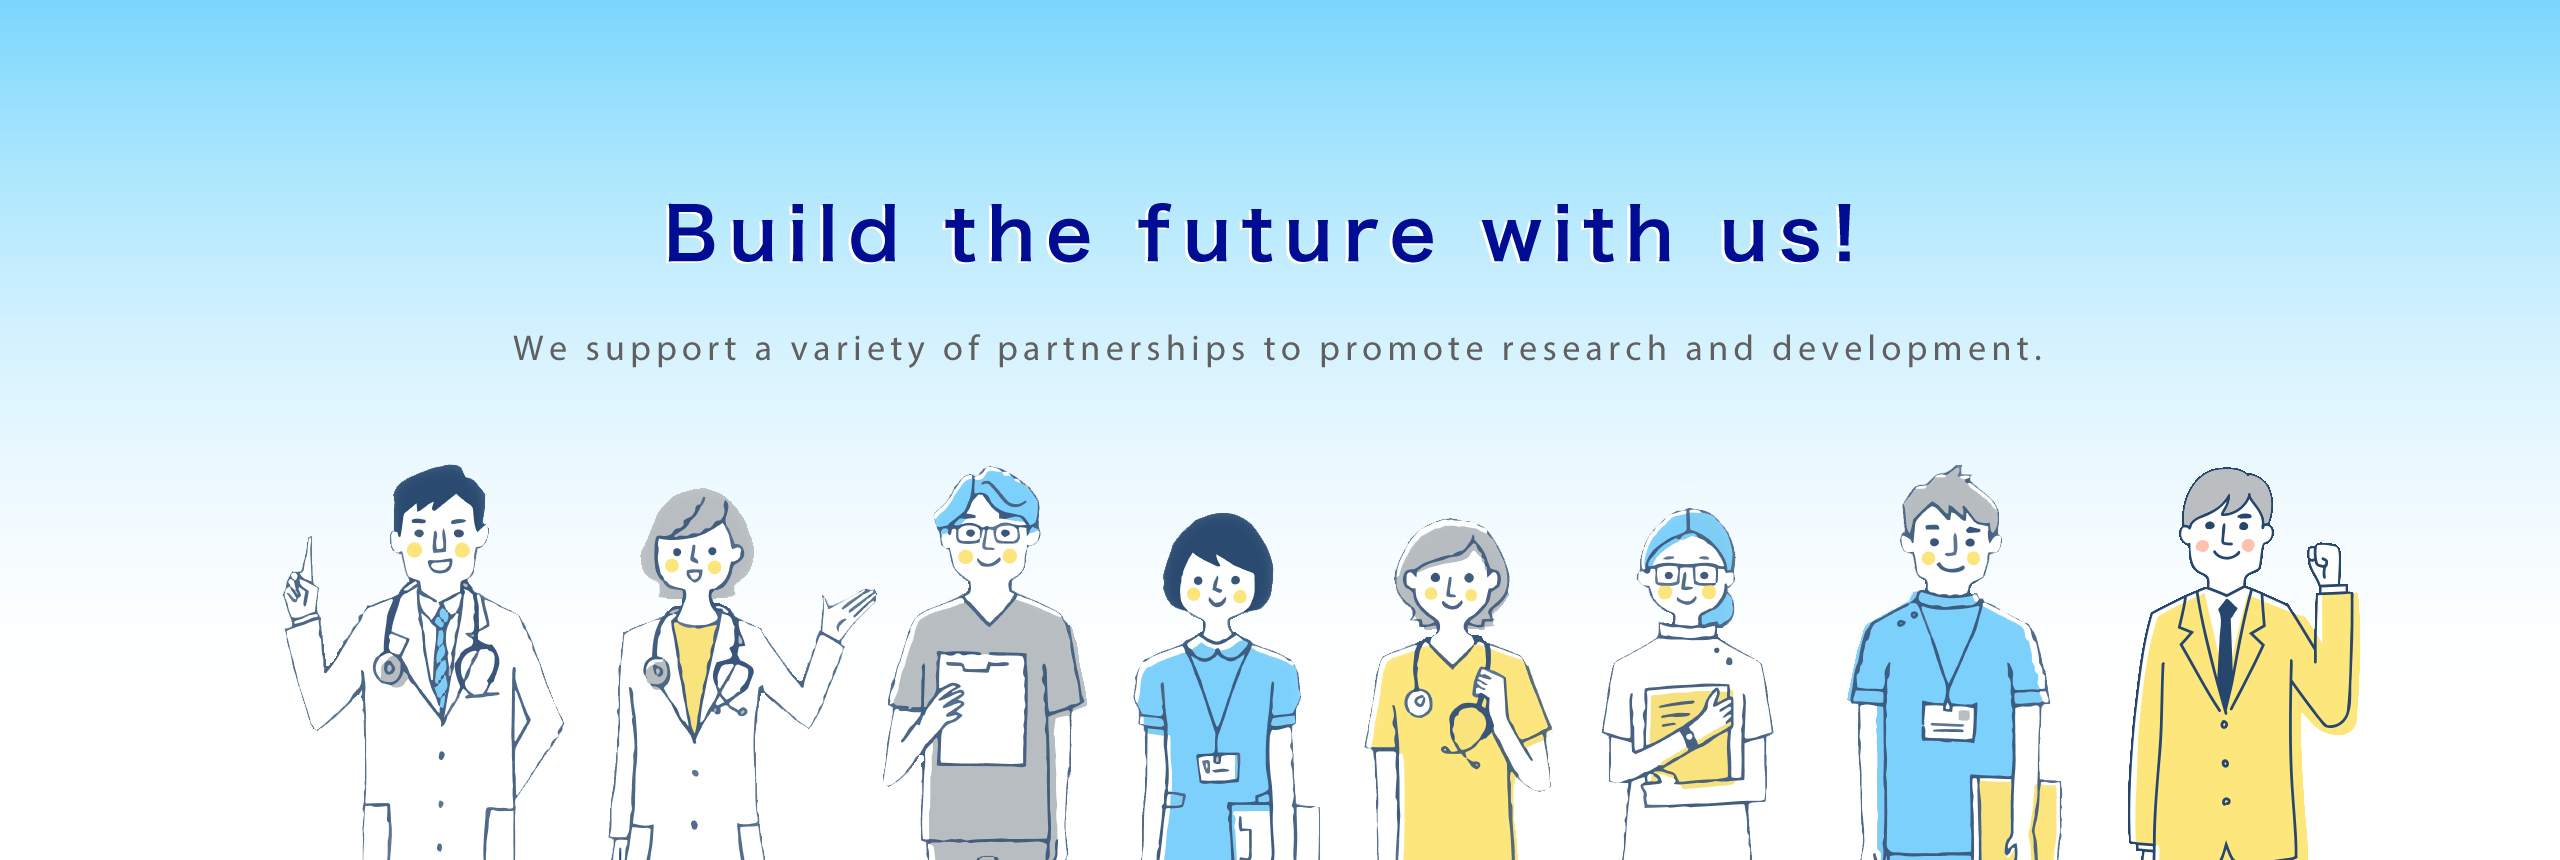 Build the future with us! We support a variety of partnerships to promote research and development.